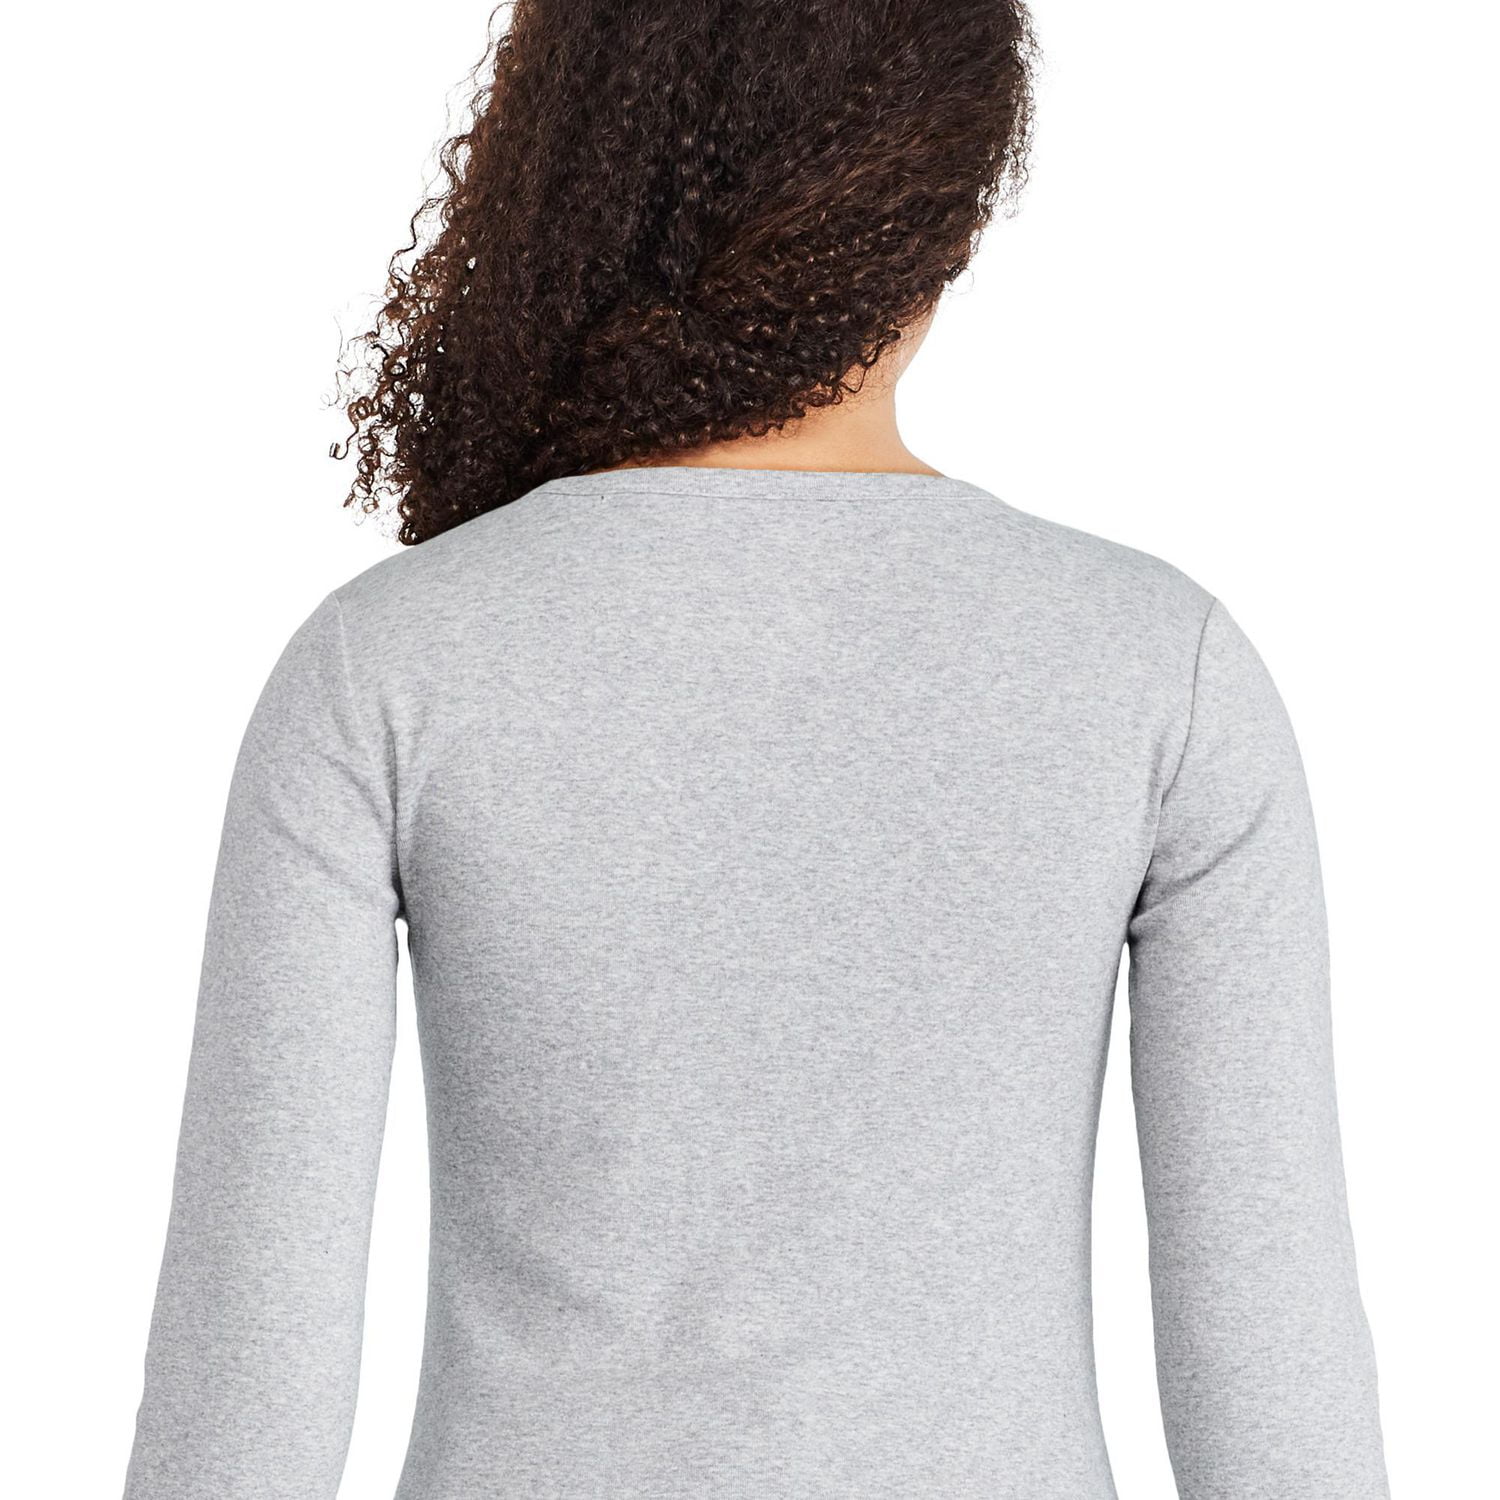 Girl With Curves Knit Long Sleeve Layering Tee Shirt Heather Gray Women's XS